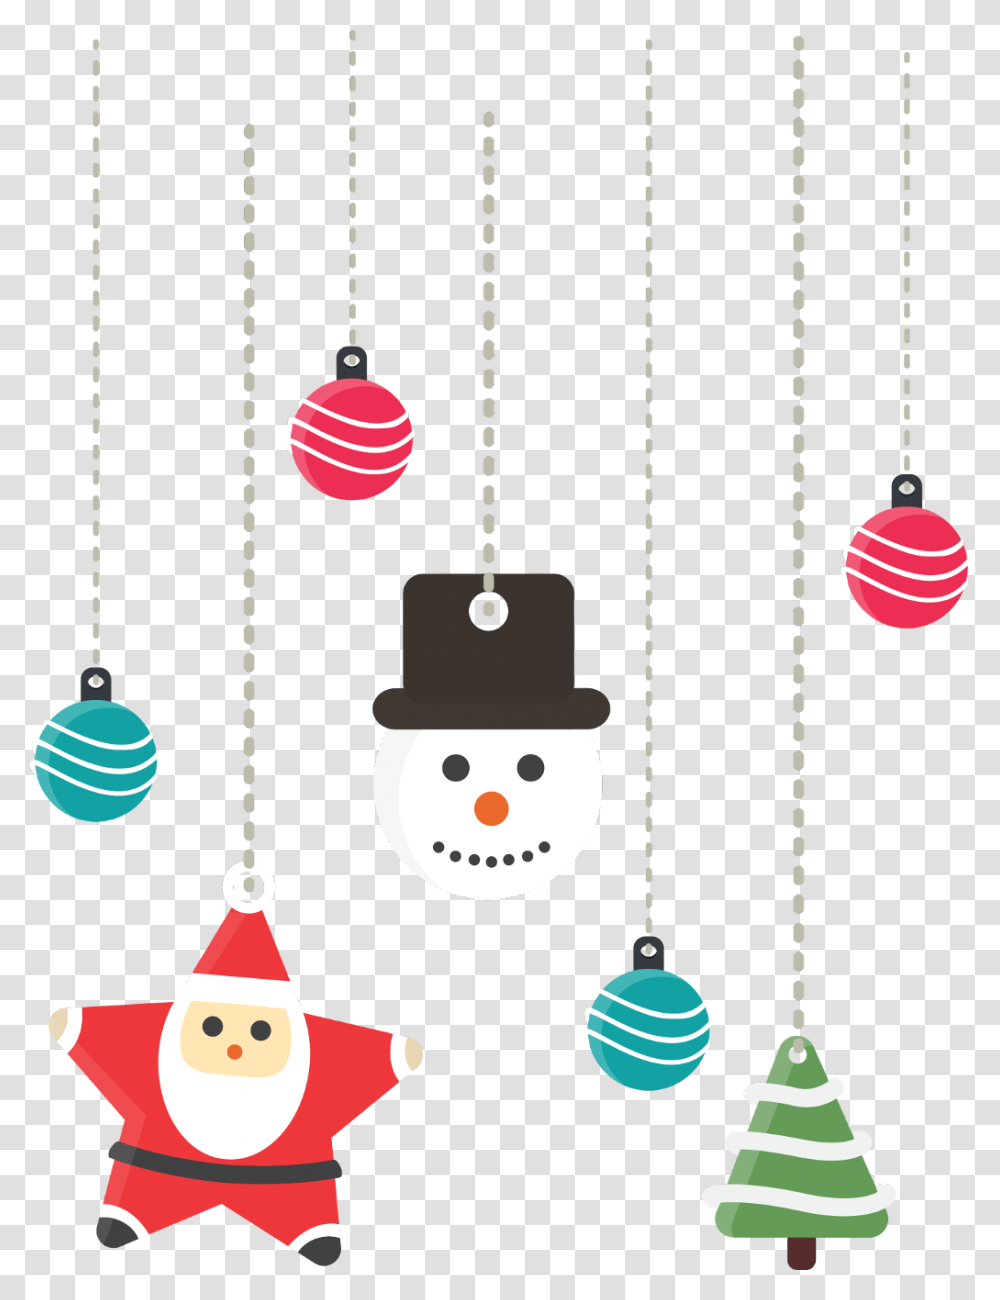 Cute Colorful Snowman Merrychristmas Christmas Background Christmas Decorations Snowman, Ornament, Outdoors, Tree, Plant Transparent Png